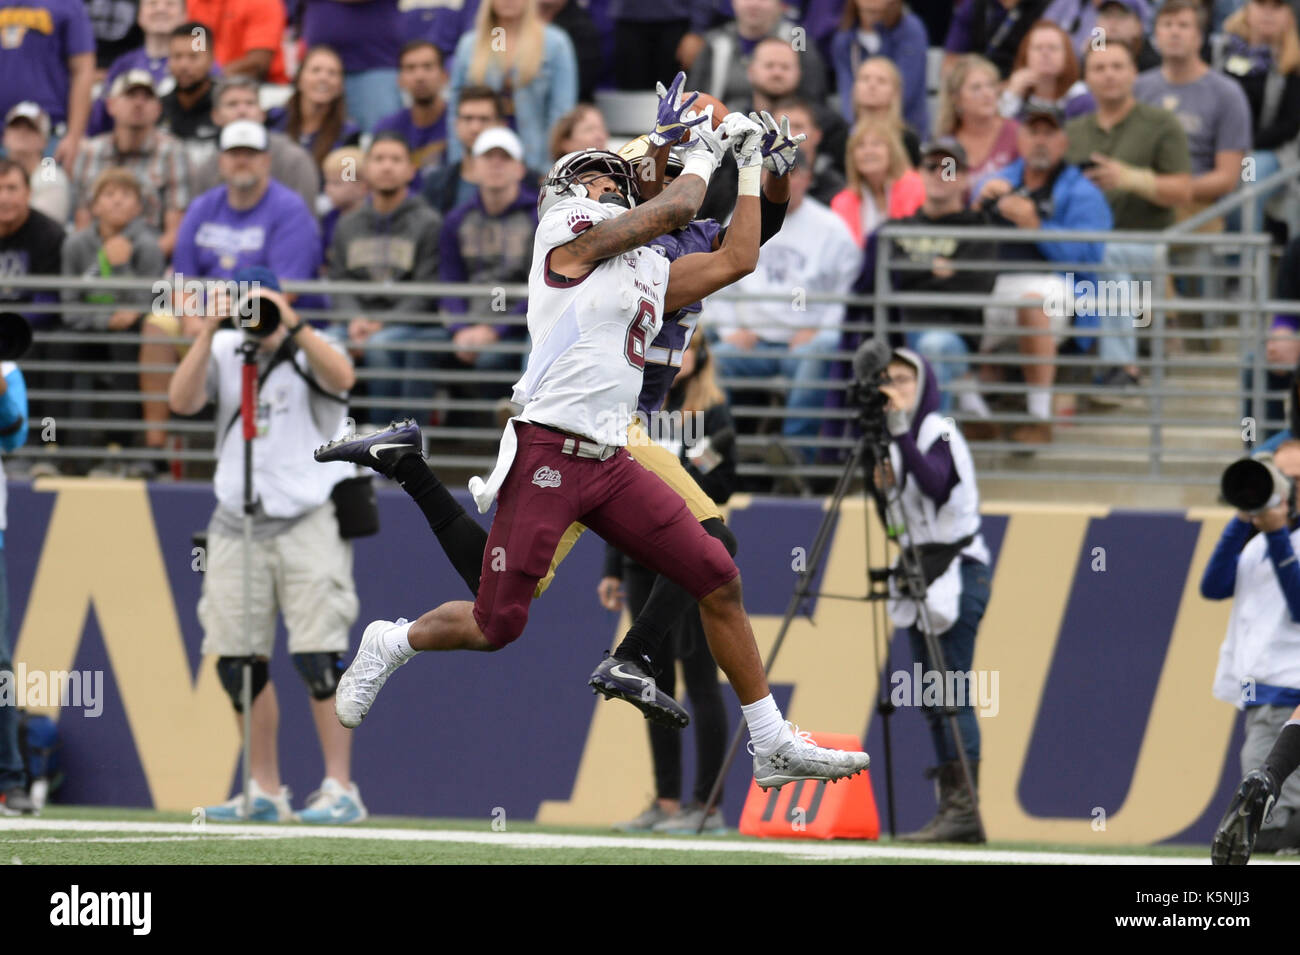 Seattle, WA, USA. 9th Sep, 2017. UW defender Jordan Miller (23) and Montana receiver Keenan Curran (6) go up for a ball in a game between the Montana Grizzlies and the Washington Huskies in Seattle, WA. Jeff Halstead/CSM/Alamy Live News Stock Photo